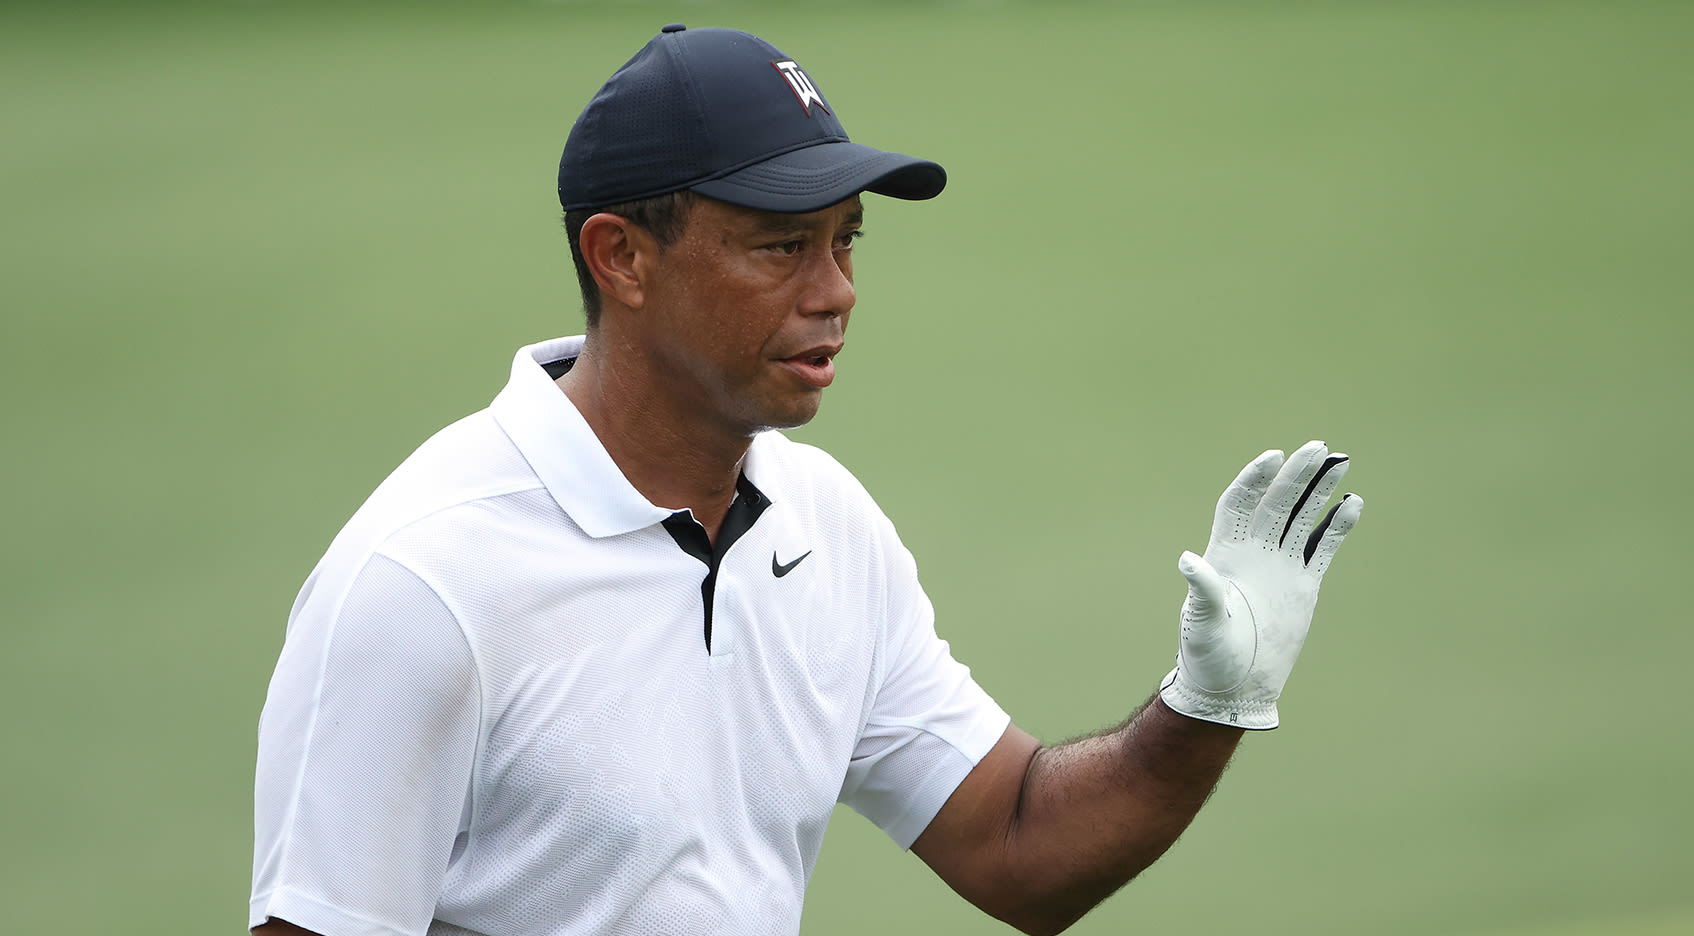 Tiger Woods opens Masters in 2over 74 PGA TOUR